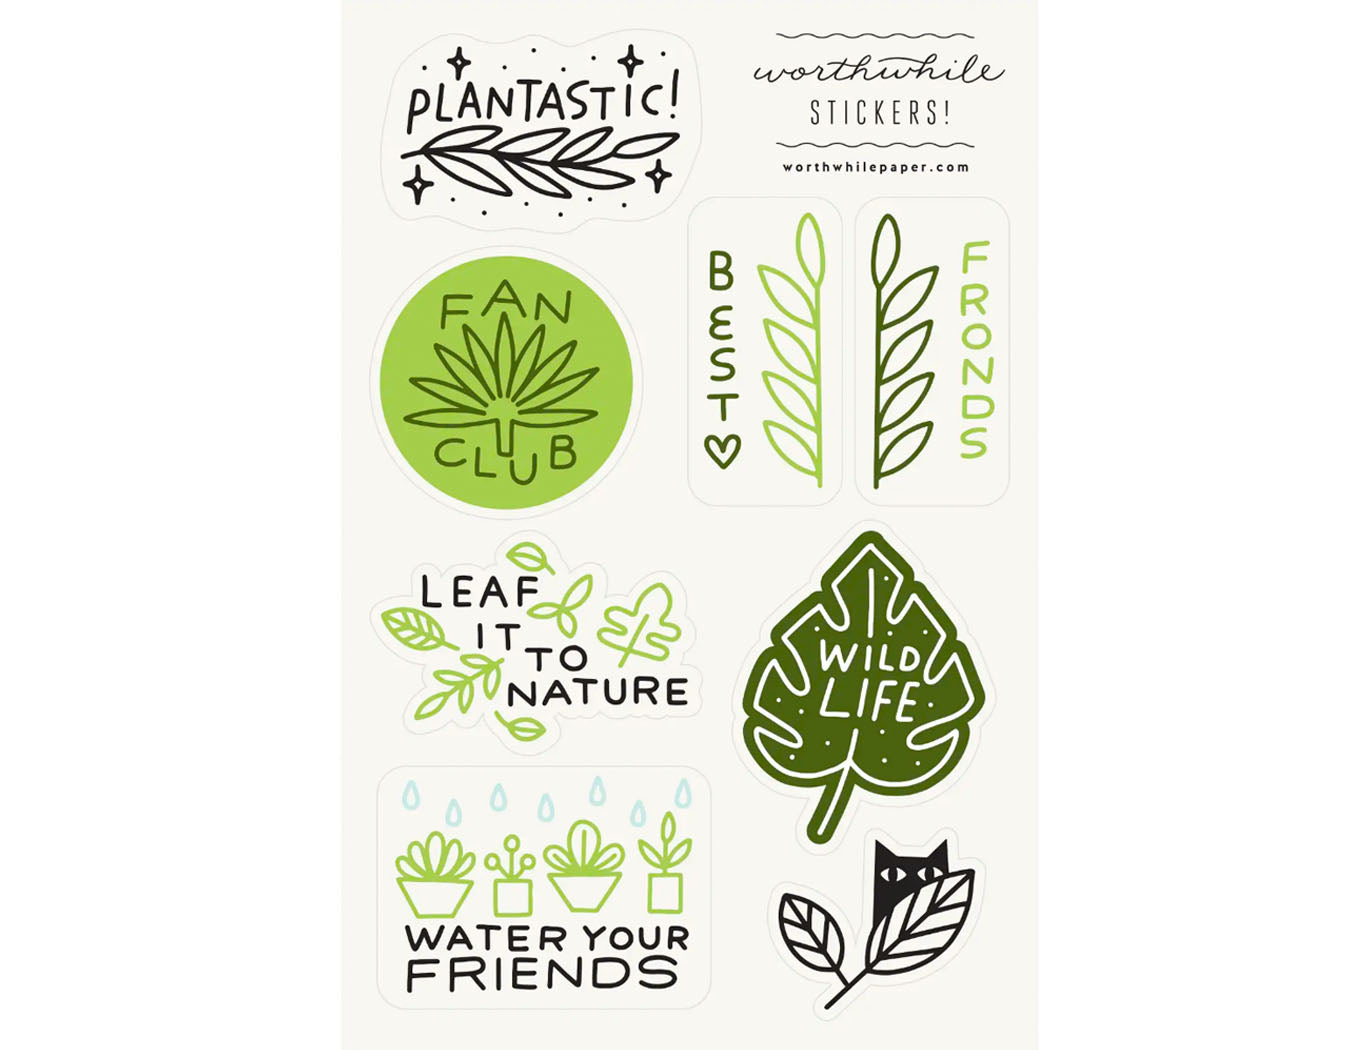 plant sticker sheet- plantastic! best fronds, fan club, leaf it to nature, wild life, water your friends, leaf and hiding cat